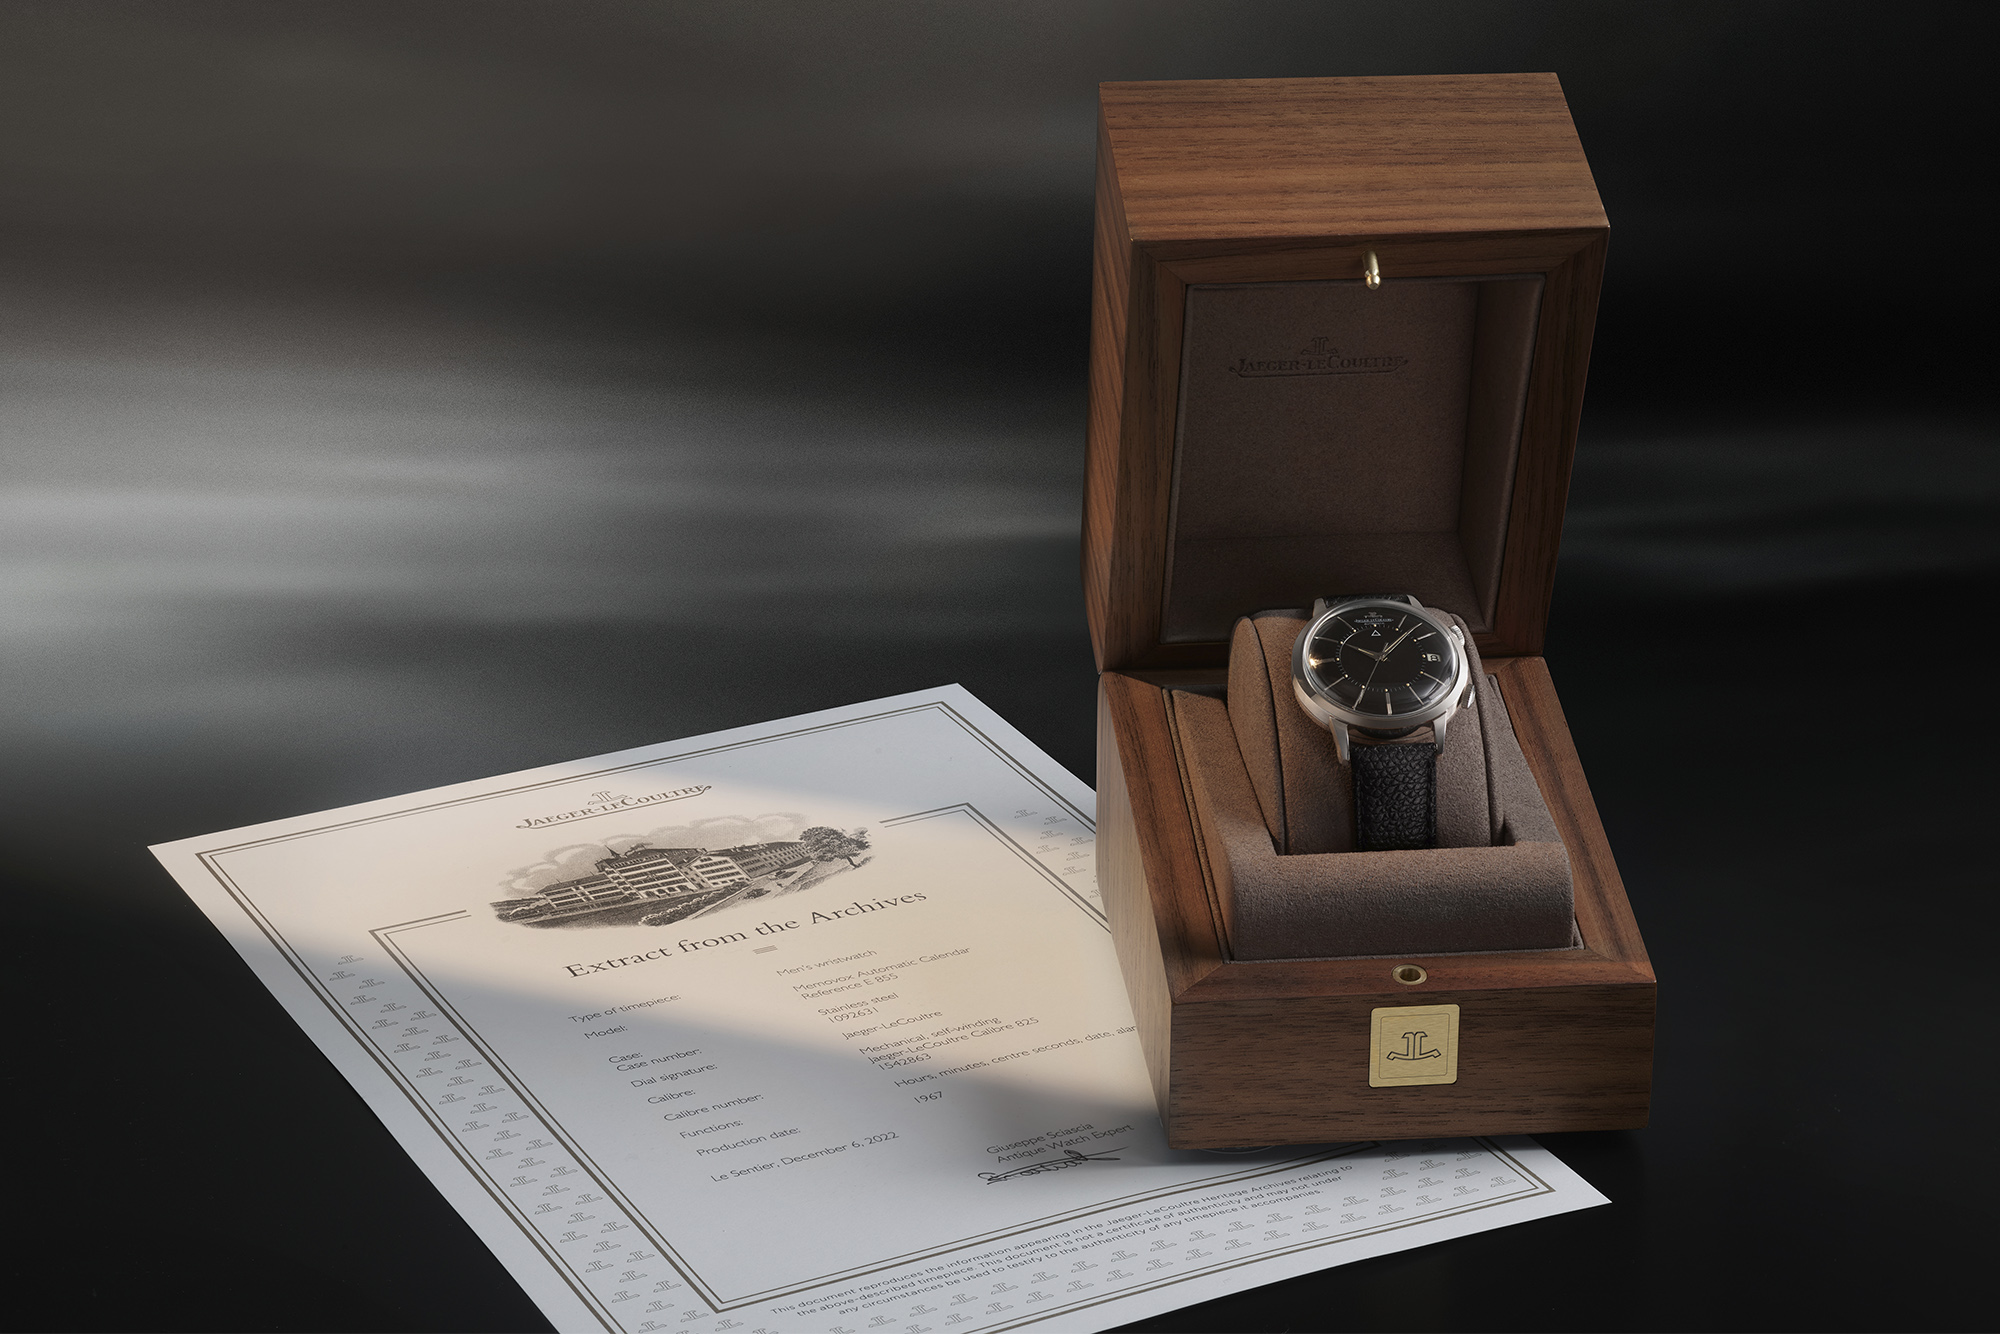 Jaeger-LeCoultre watch in wooden box with paper beneath it